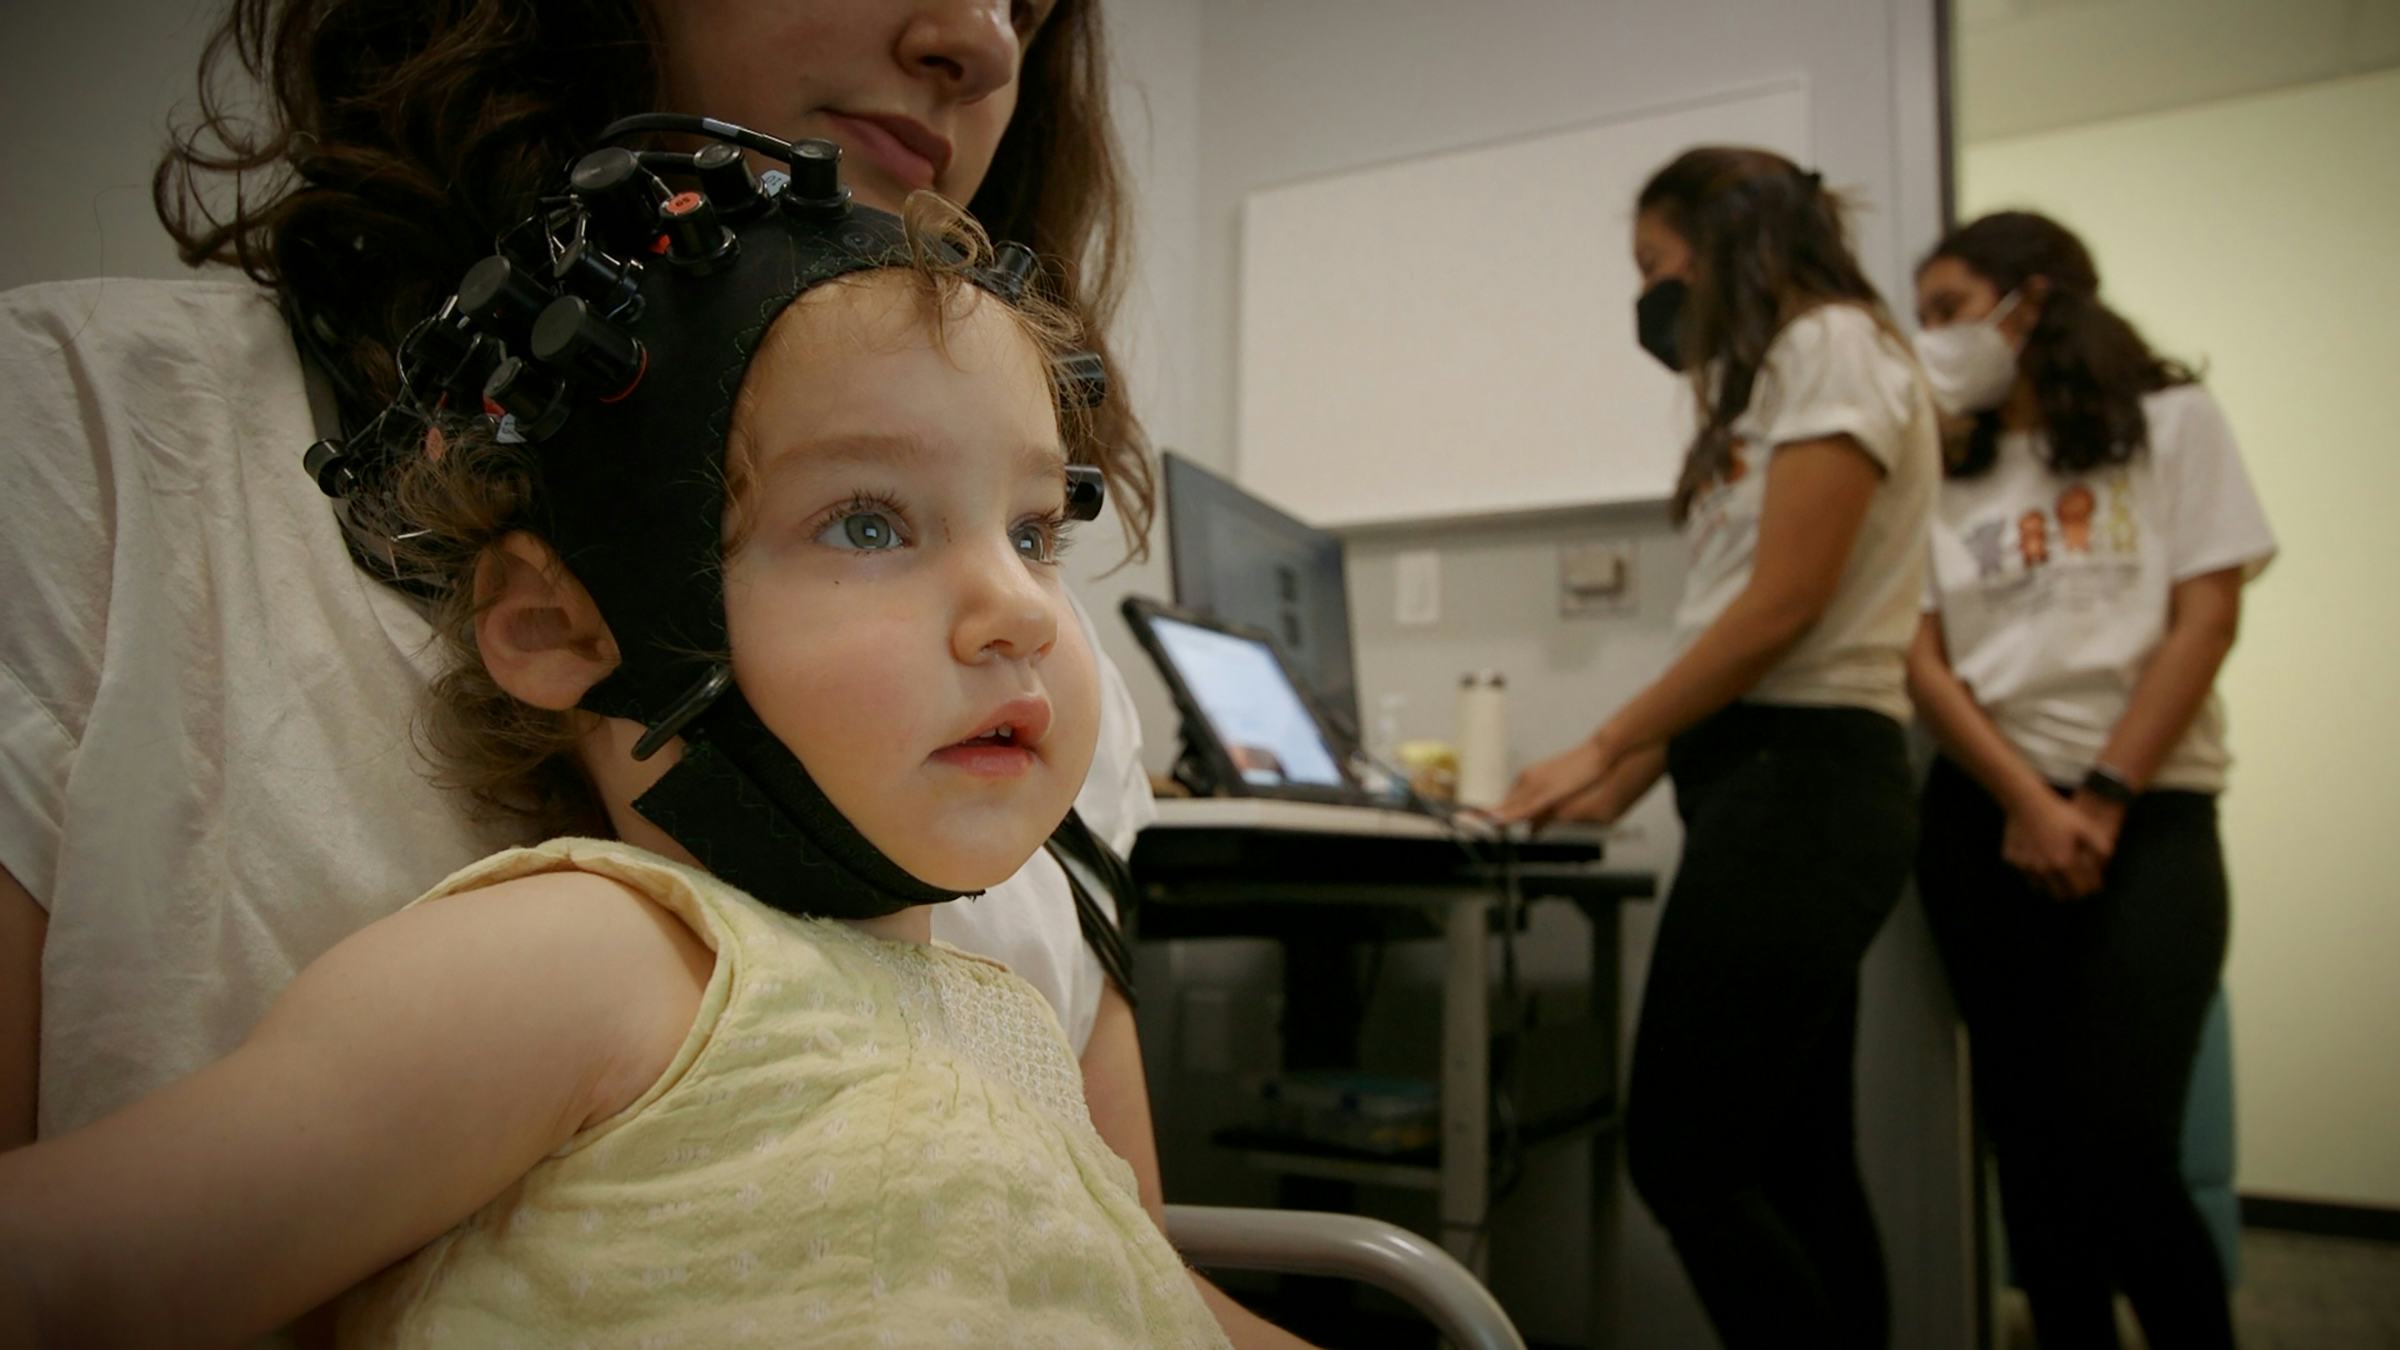 Girl wearing a black cap and sitting on her mother's lap looks off camera while two scientists look at a computer in the background